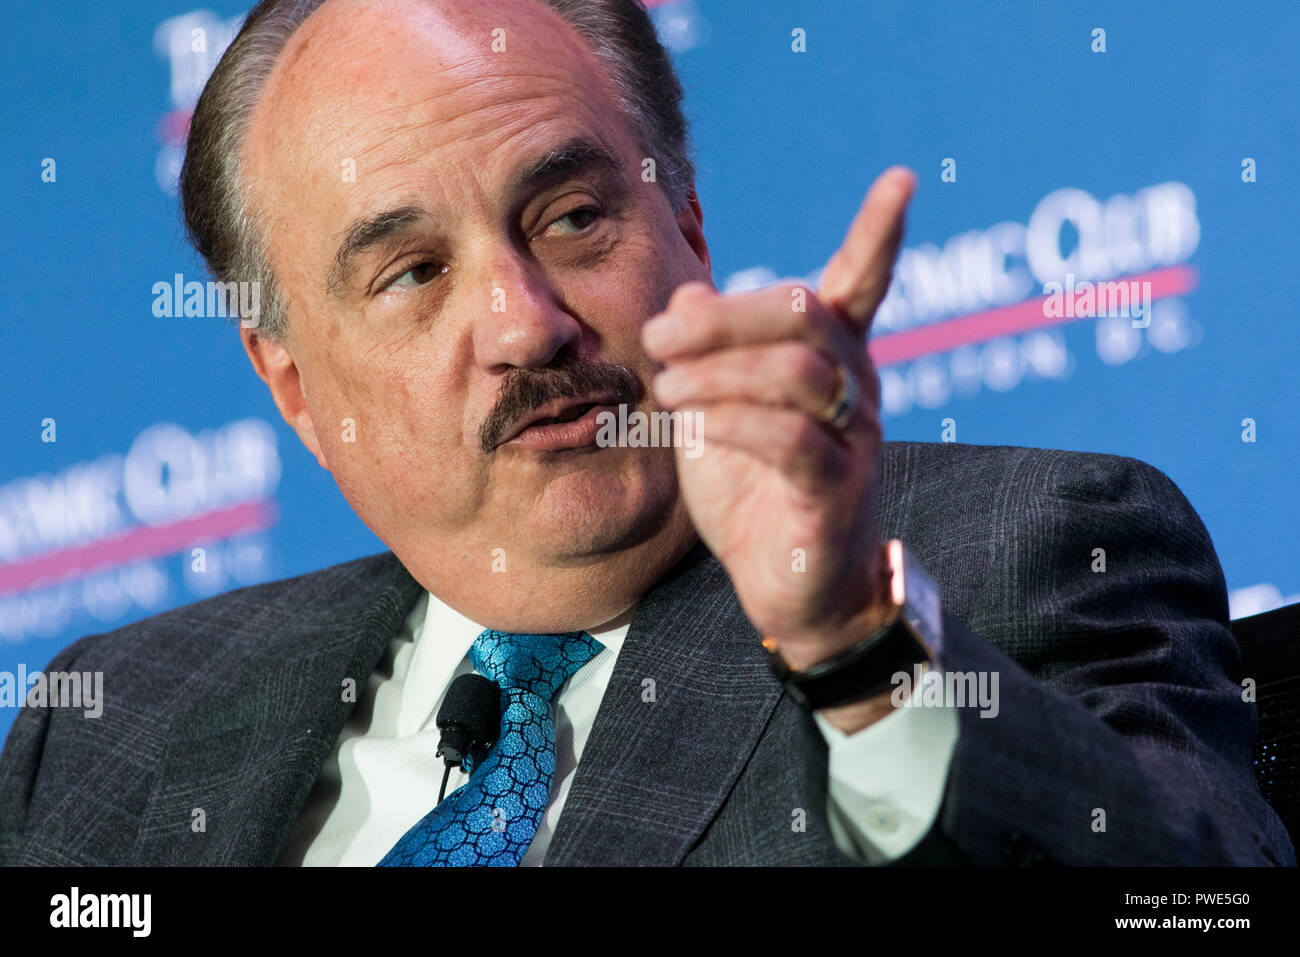 Washington DC, USA. 15th Oct 2018. Larry Merlo, President and CEO of CVS Health, participates in an interview during an Economic Club of Washington event in Washington, D.C., on October 15, 2018. Credit: Kristoffer Tripplaar/Alamy Live News Stock Photo